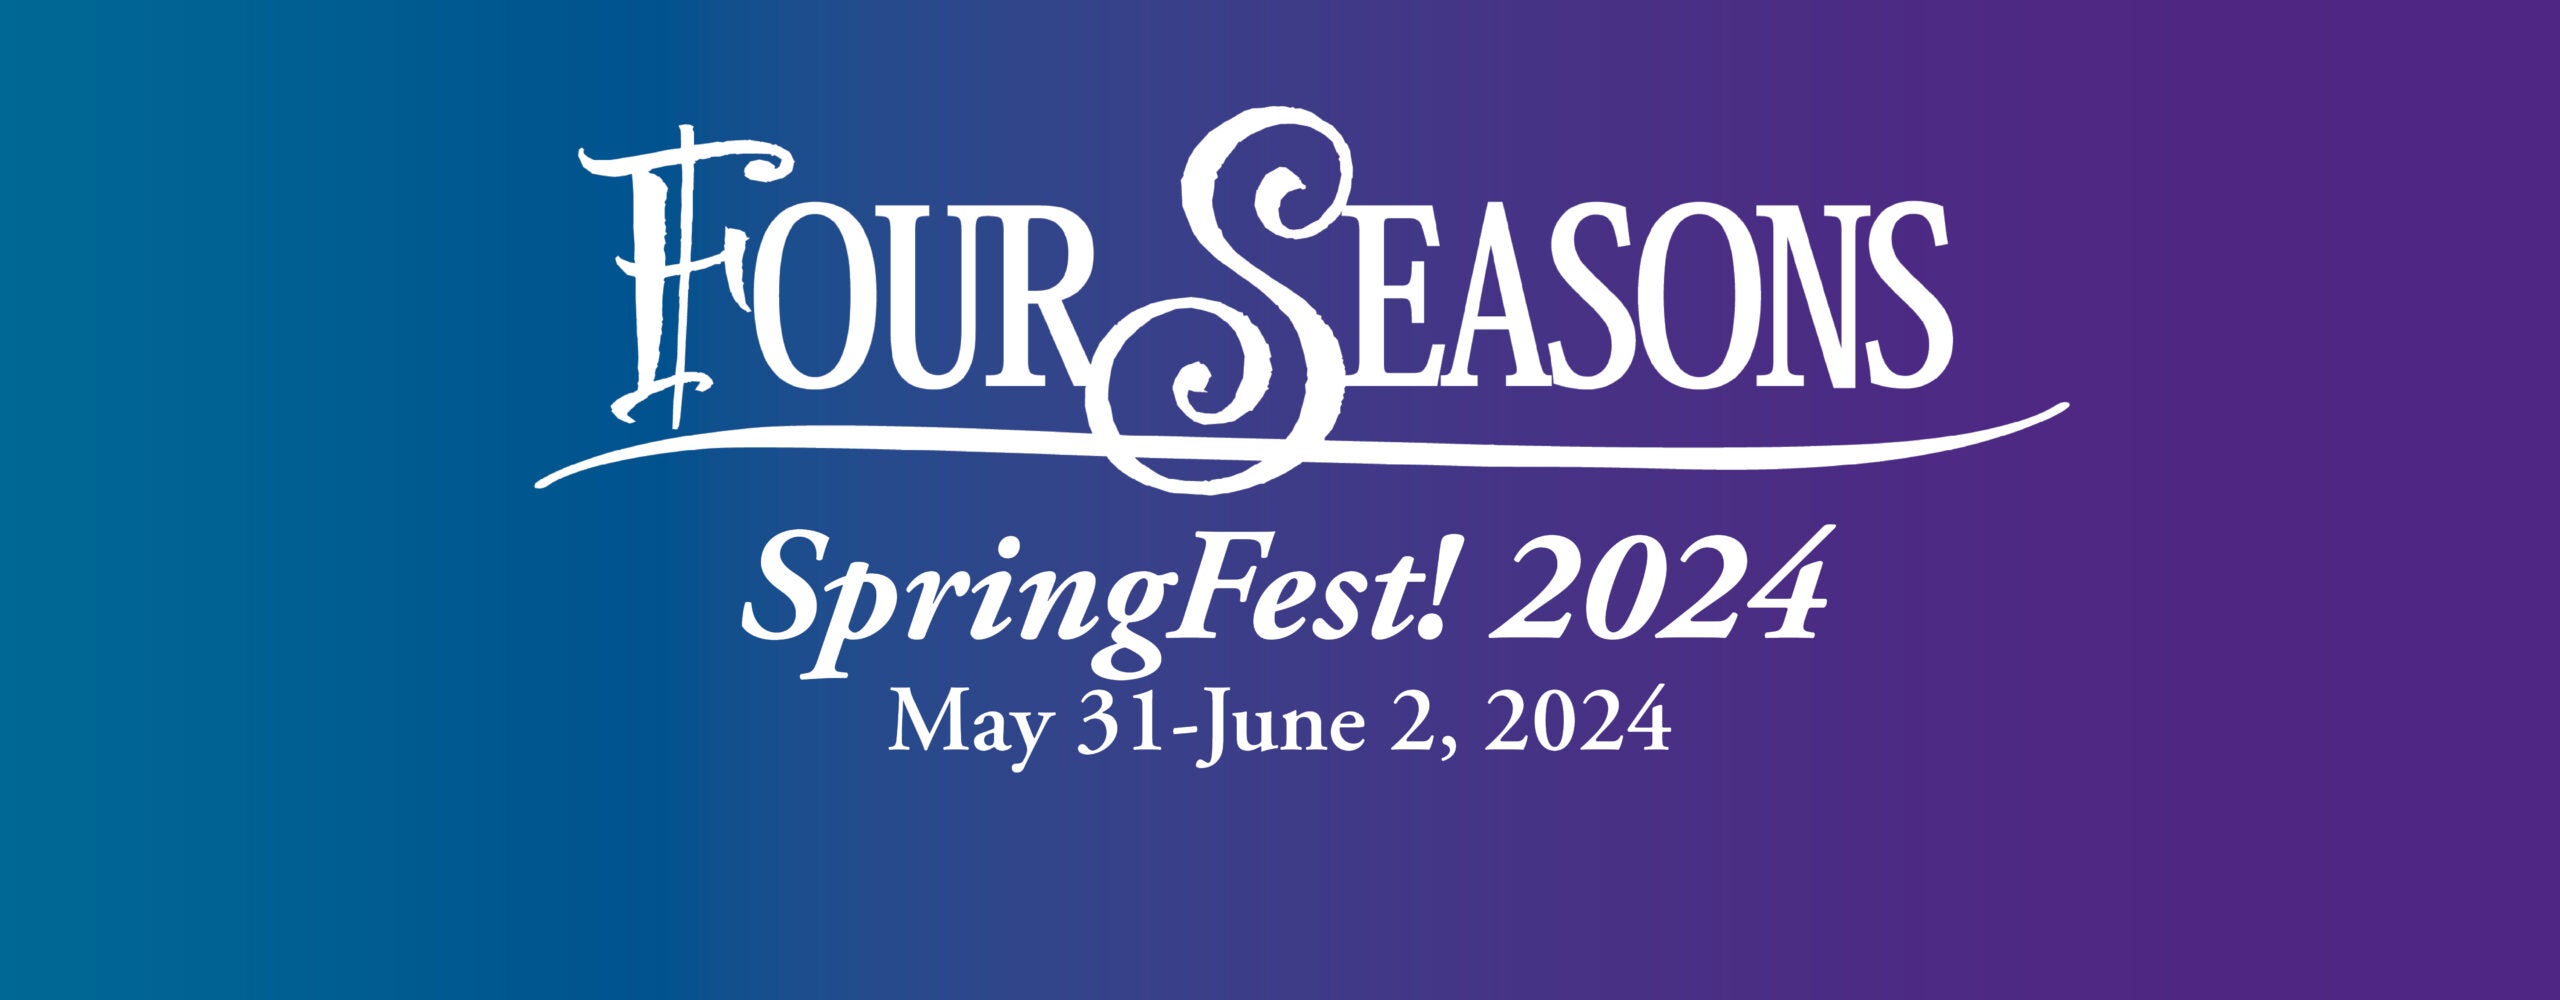 SpringFest! 2024 May 31-June 2, 2024